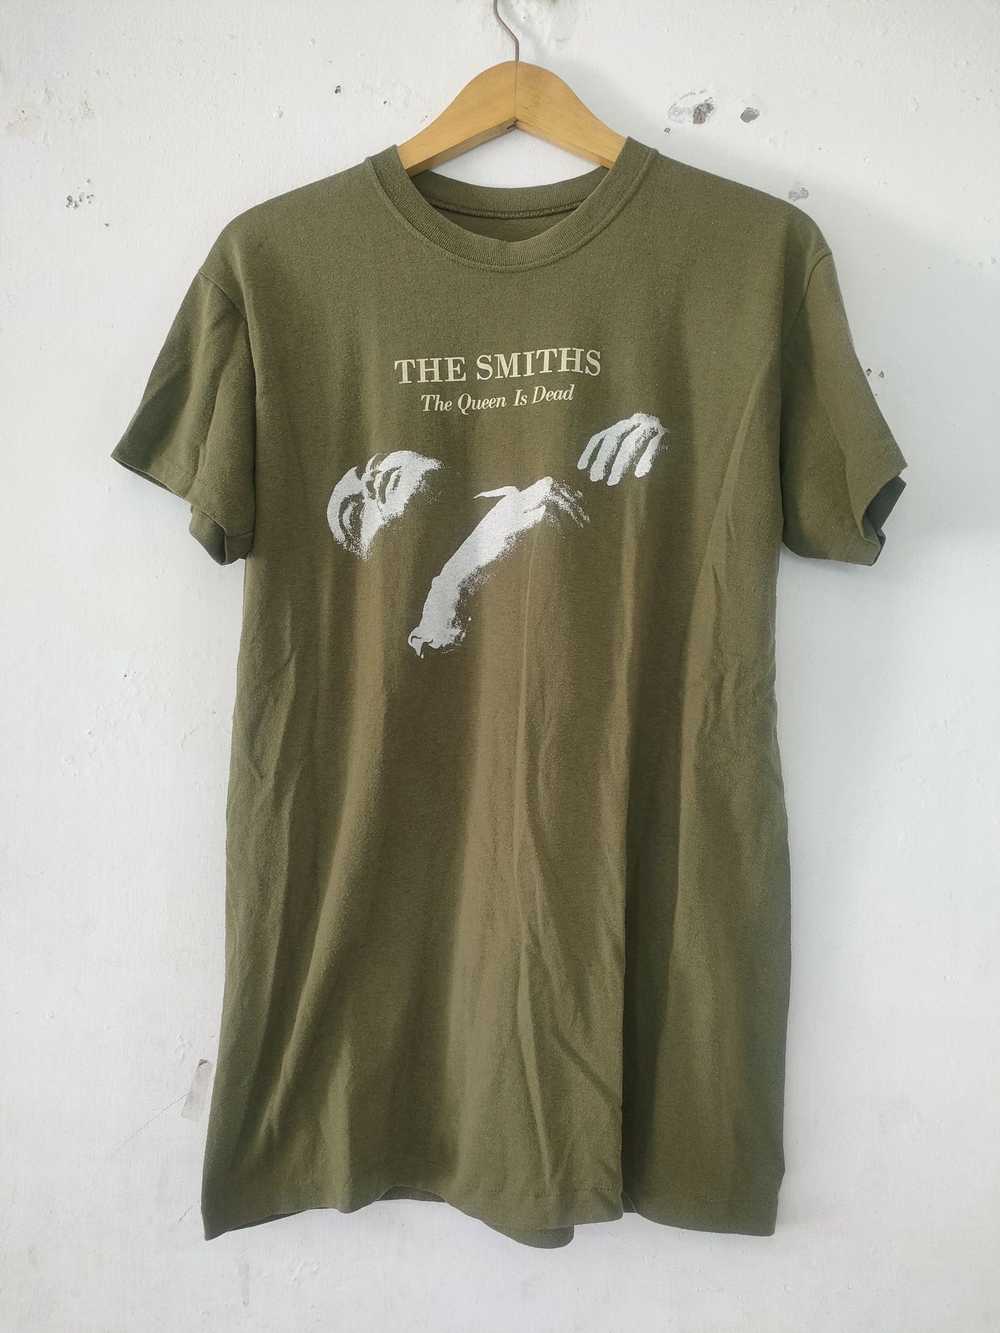 Band Tees × Morrissey × The Smiths THE SMITHS 'TH… - image 1